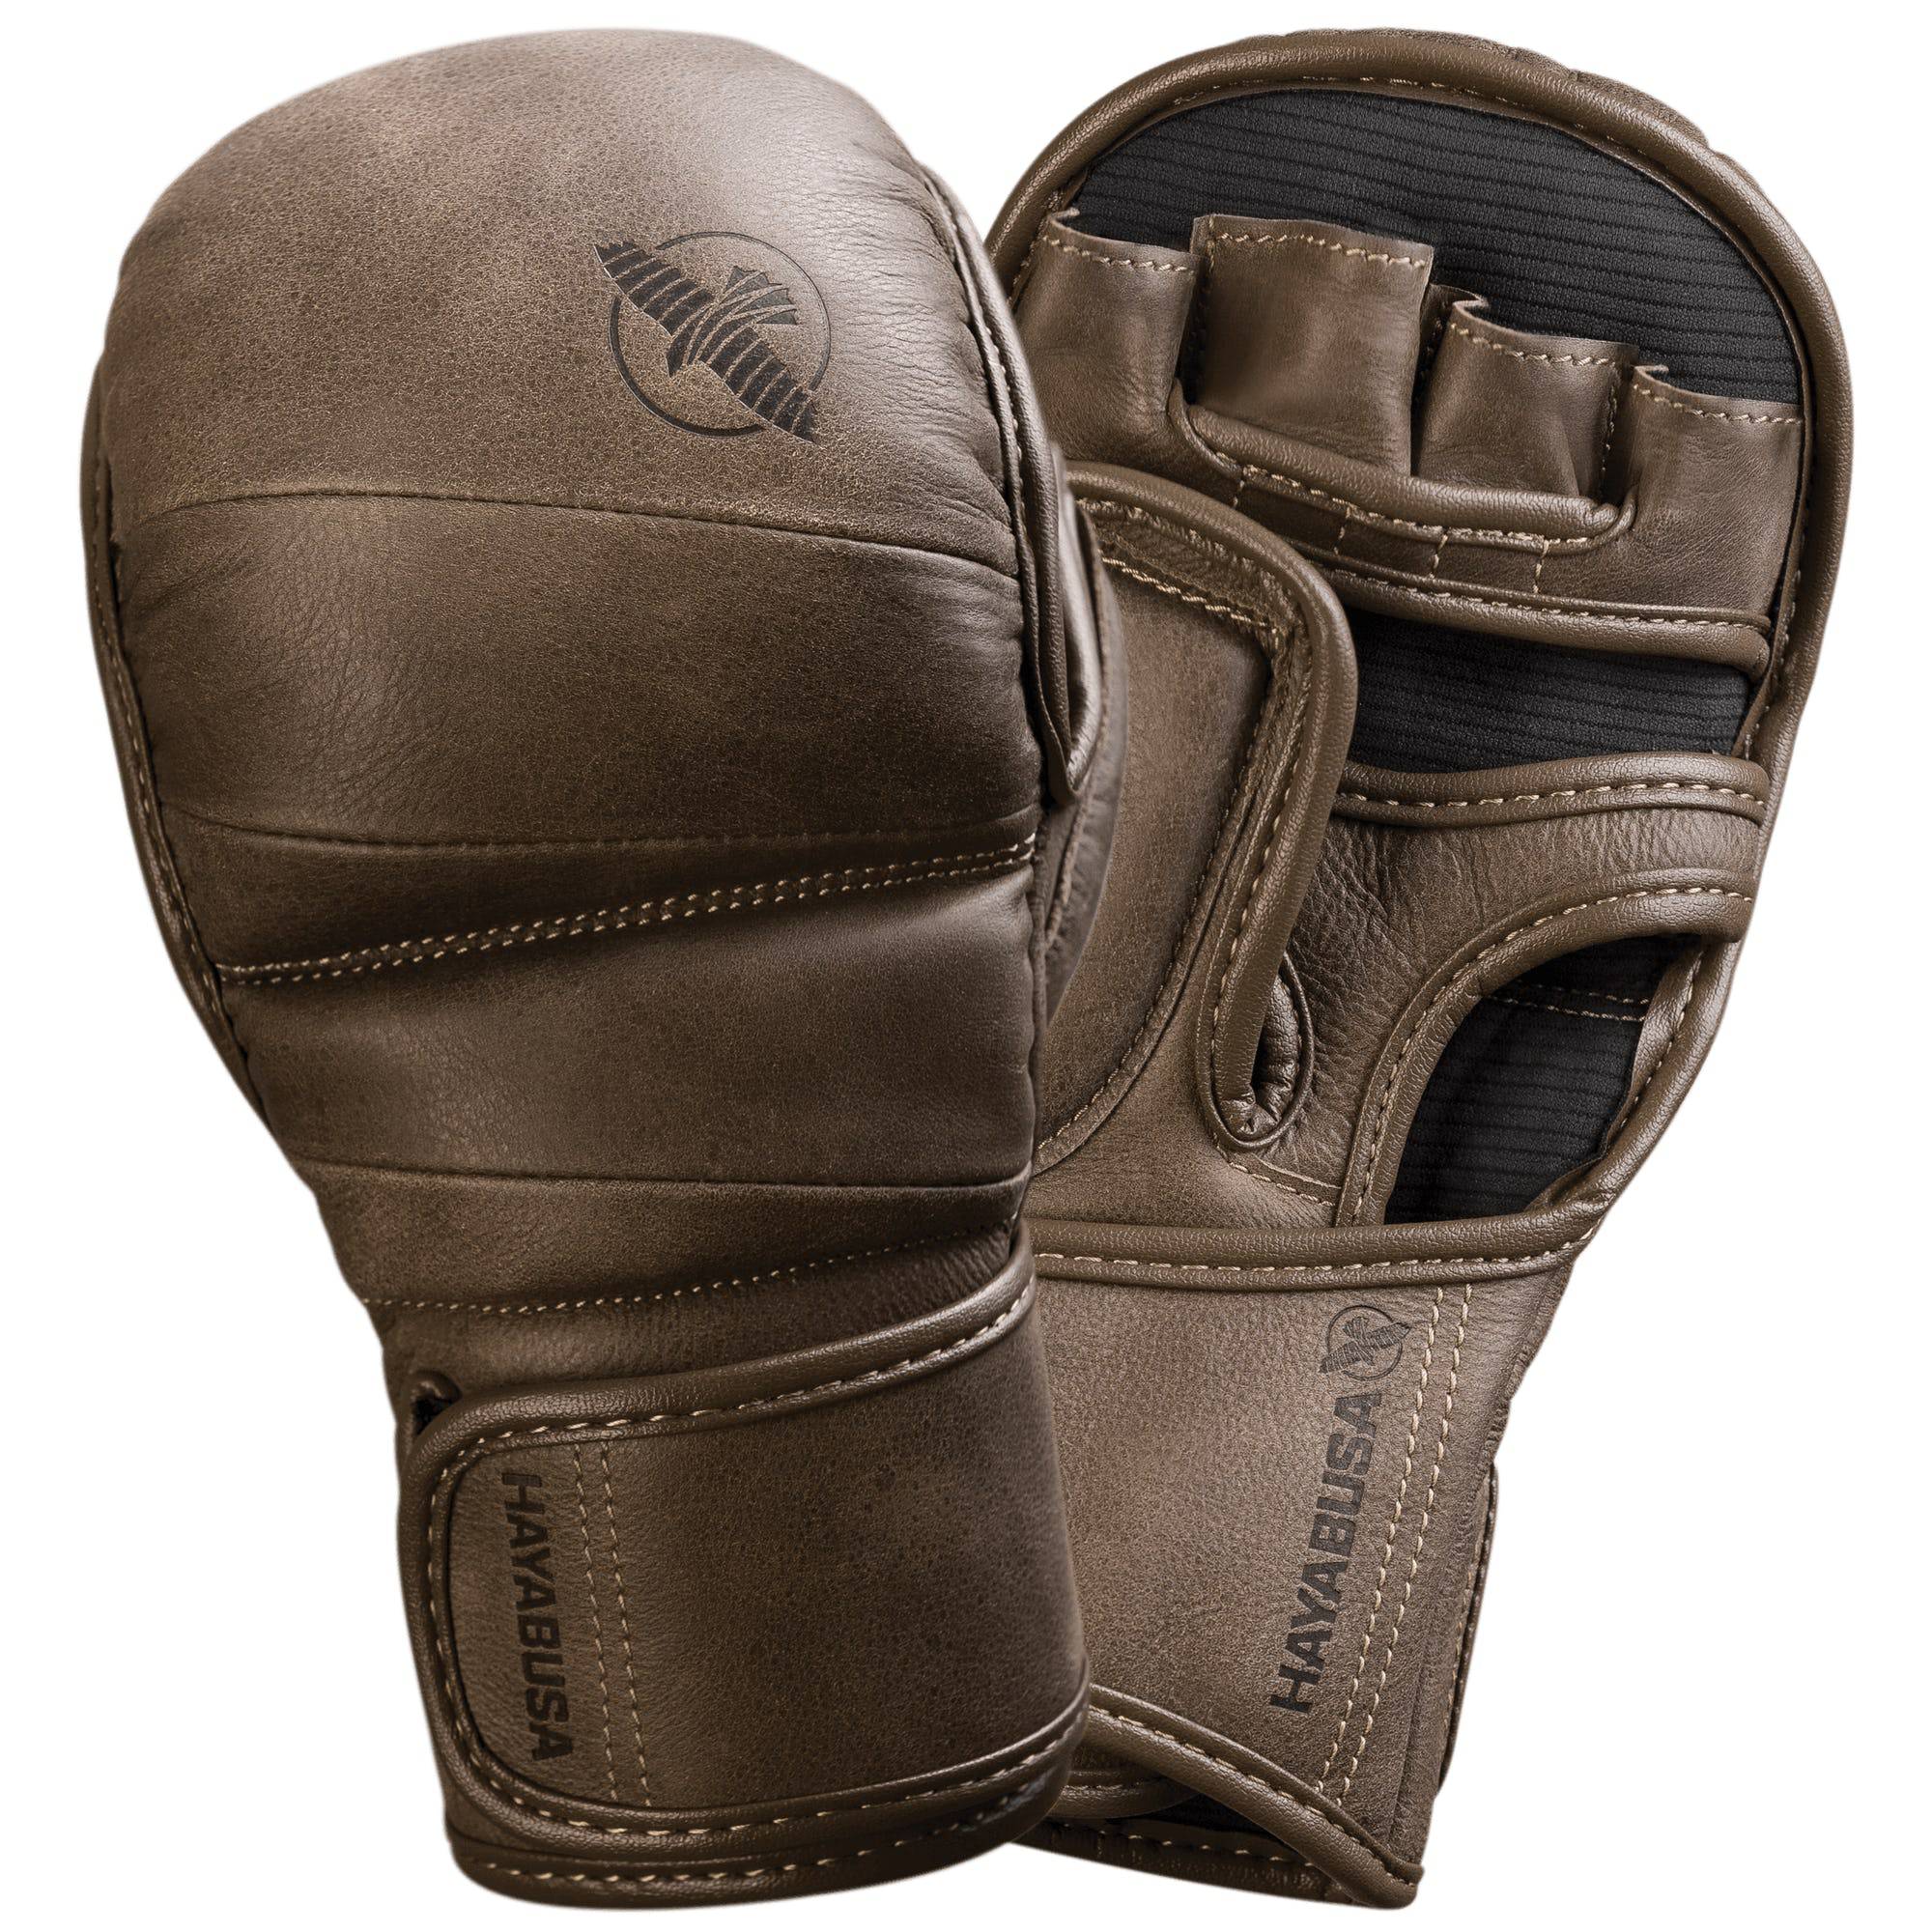 RDX MMA Gloves Martial Arts Combat Punch Training Sparring Fighting  Grappling